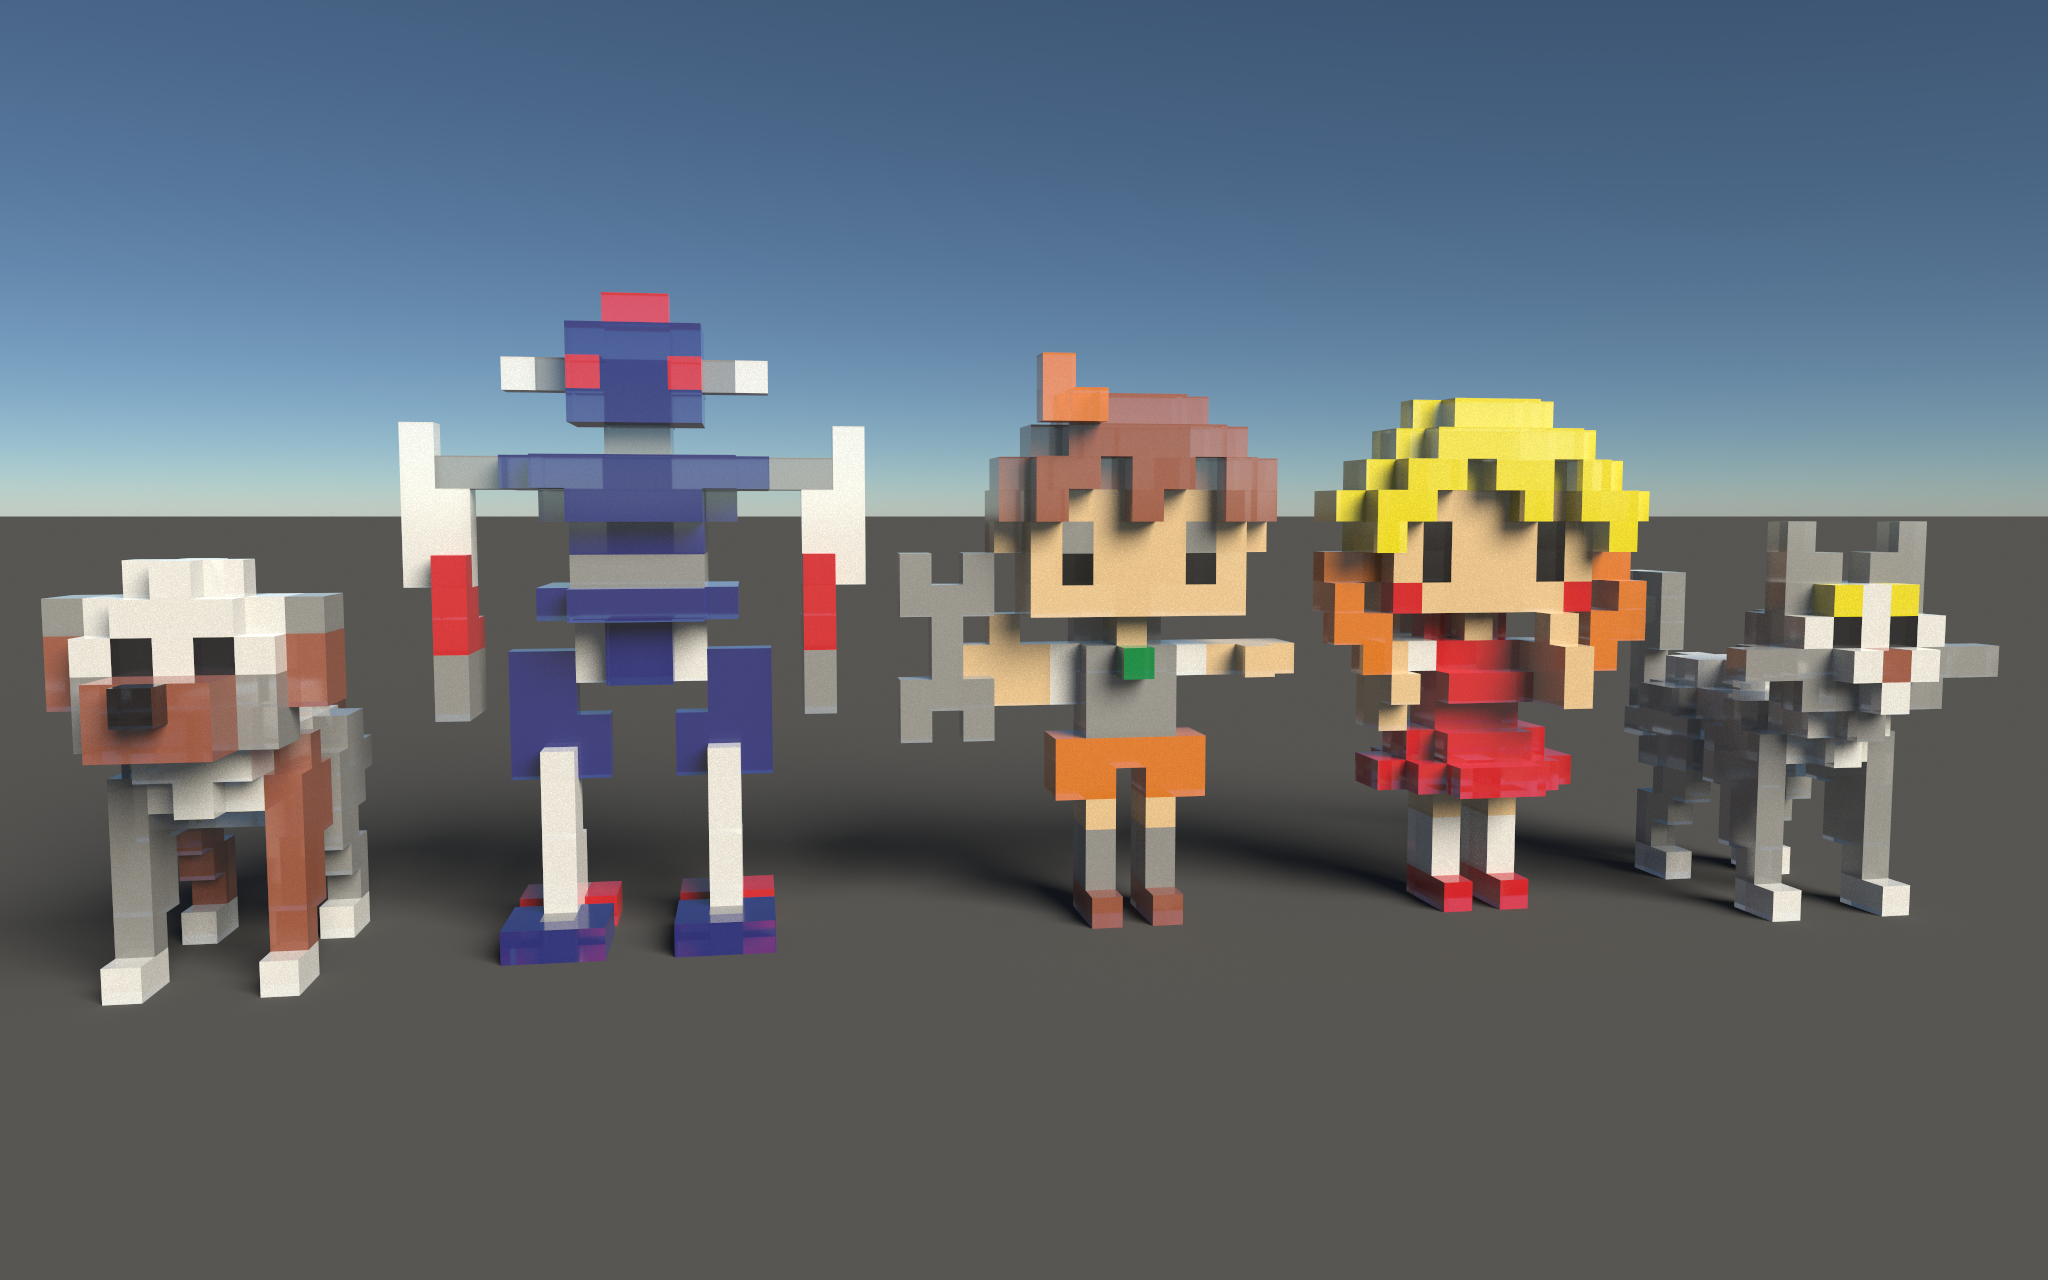 Five complex characters designed by PC free software MagicaVoxel